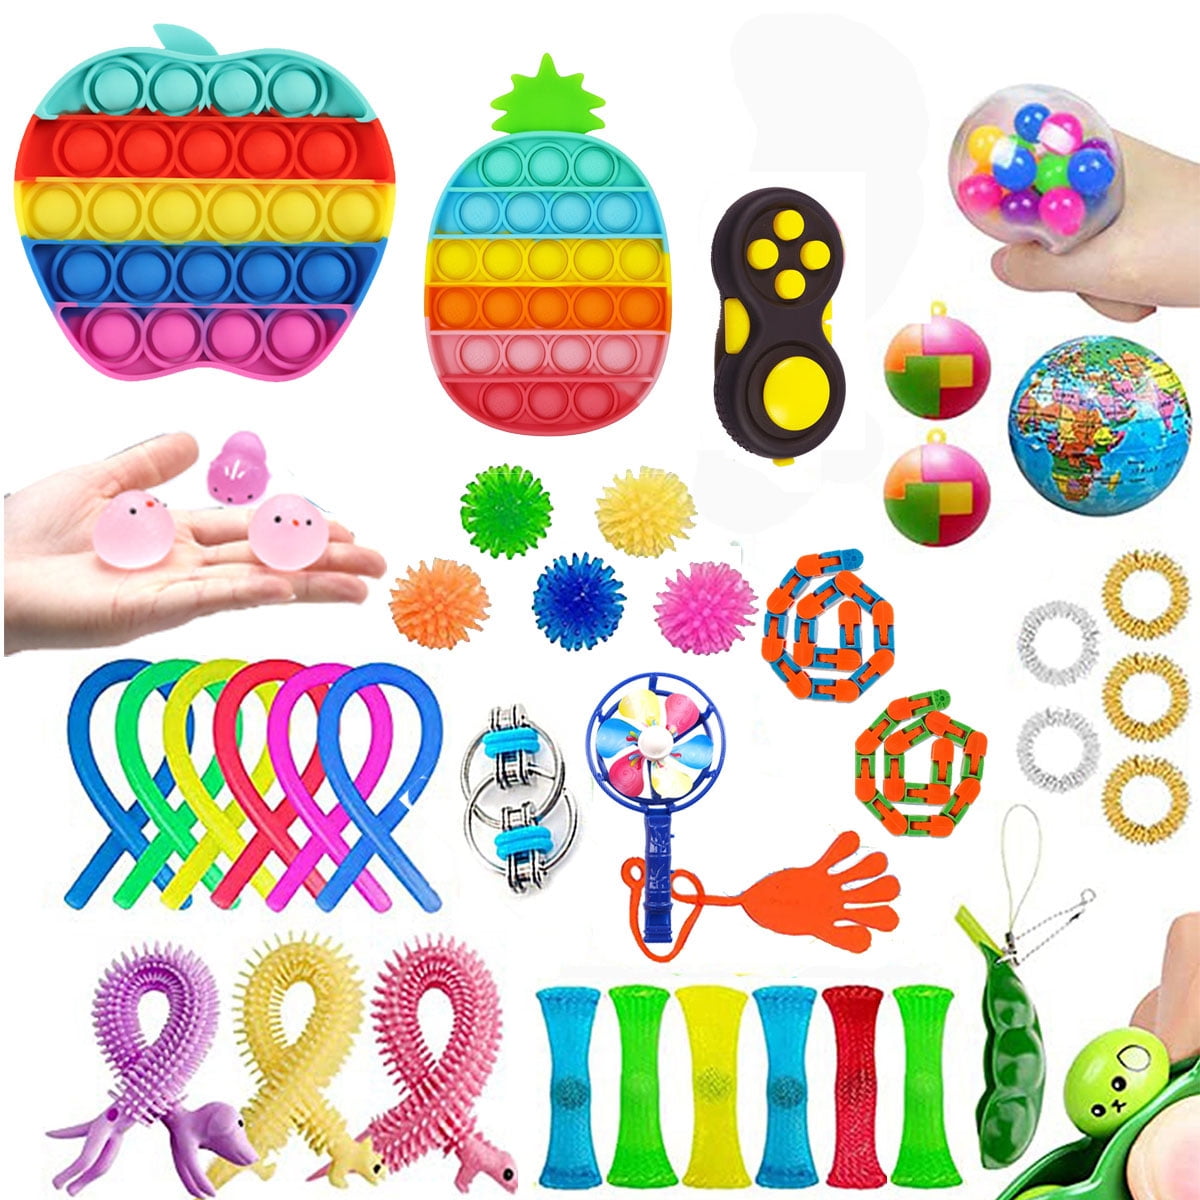 Details about   Squishy Sensory Stress Reliever Ball Toy Autism Squeeze Anxiety Fidget Relief 